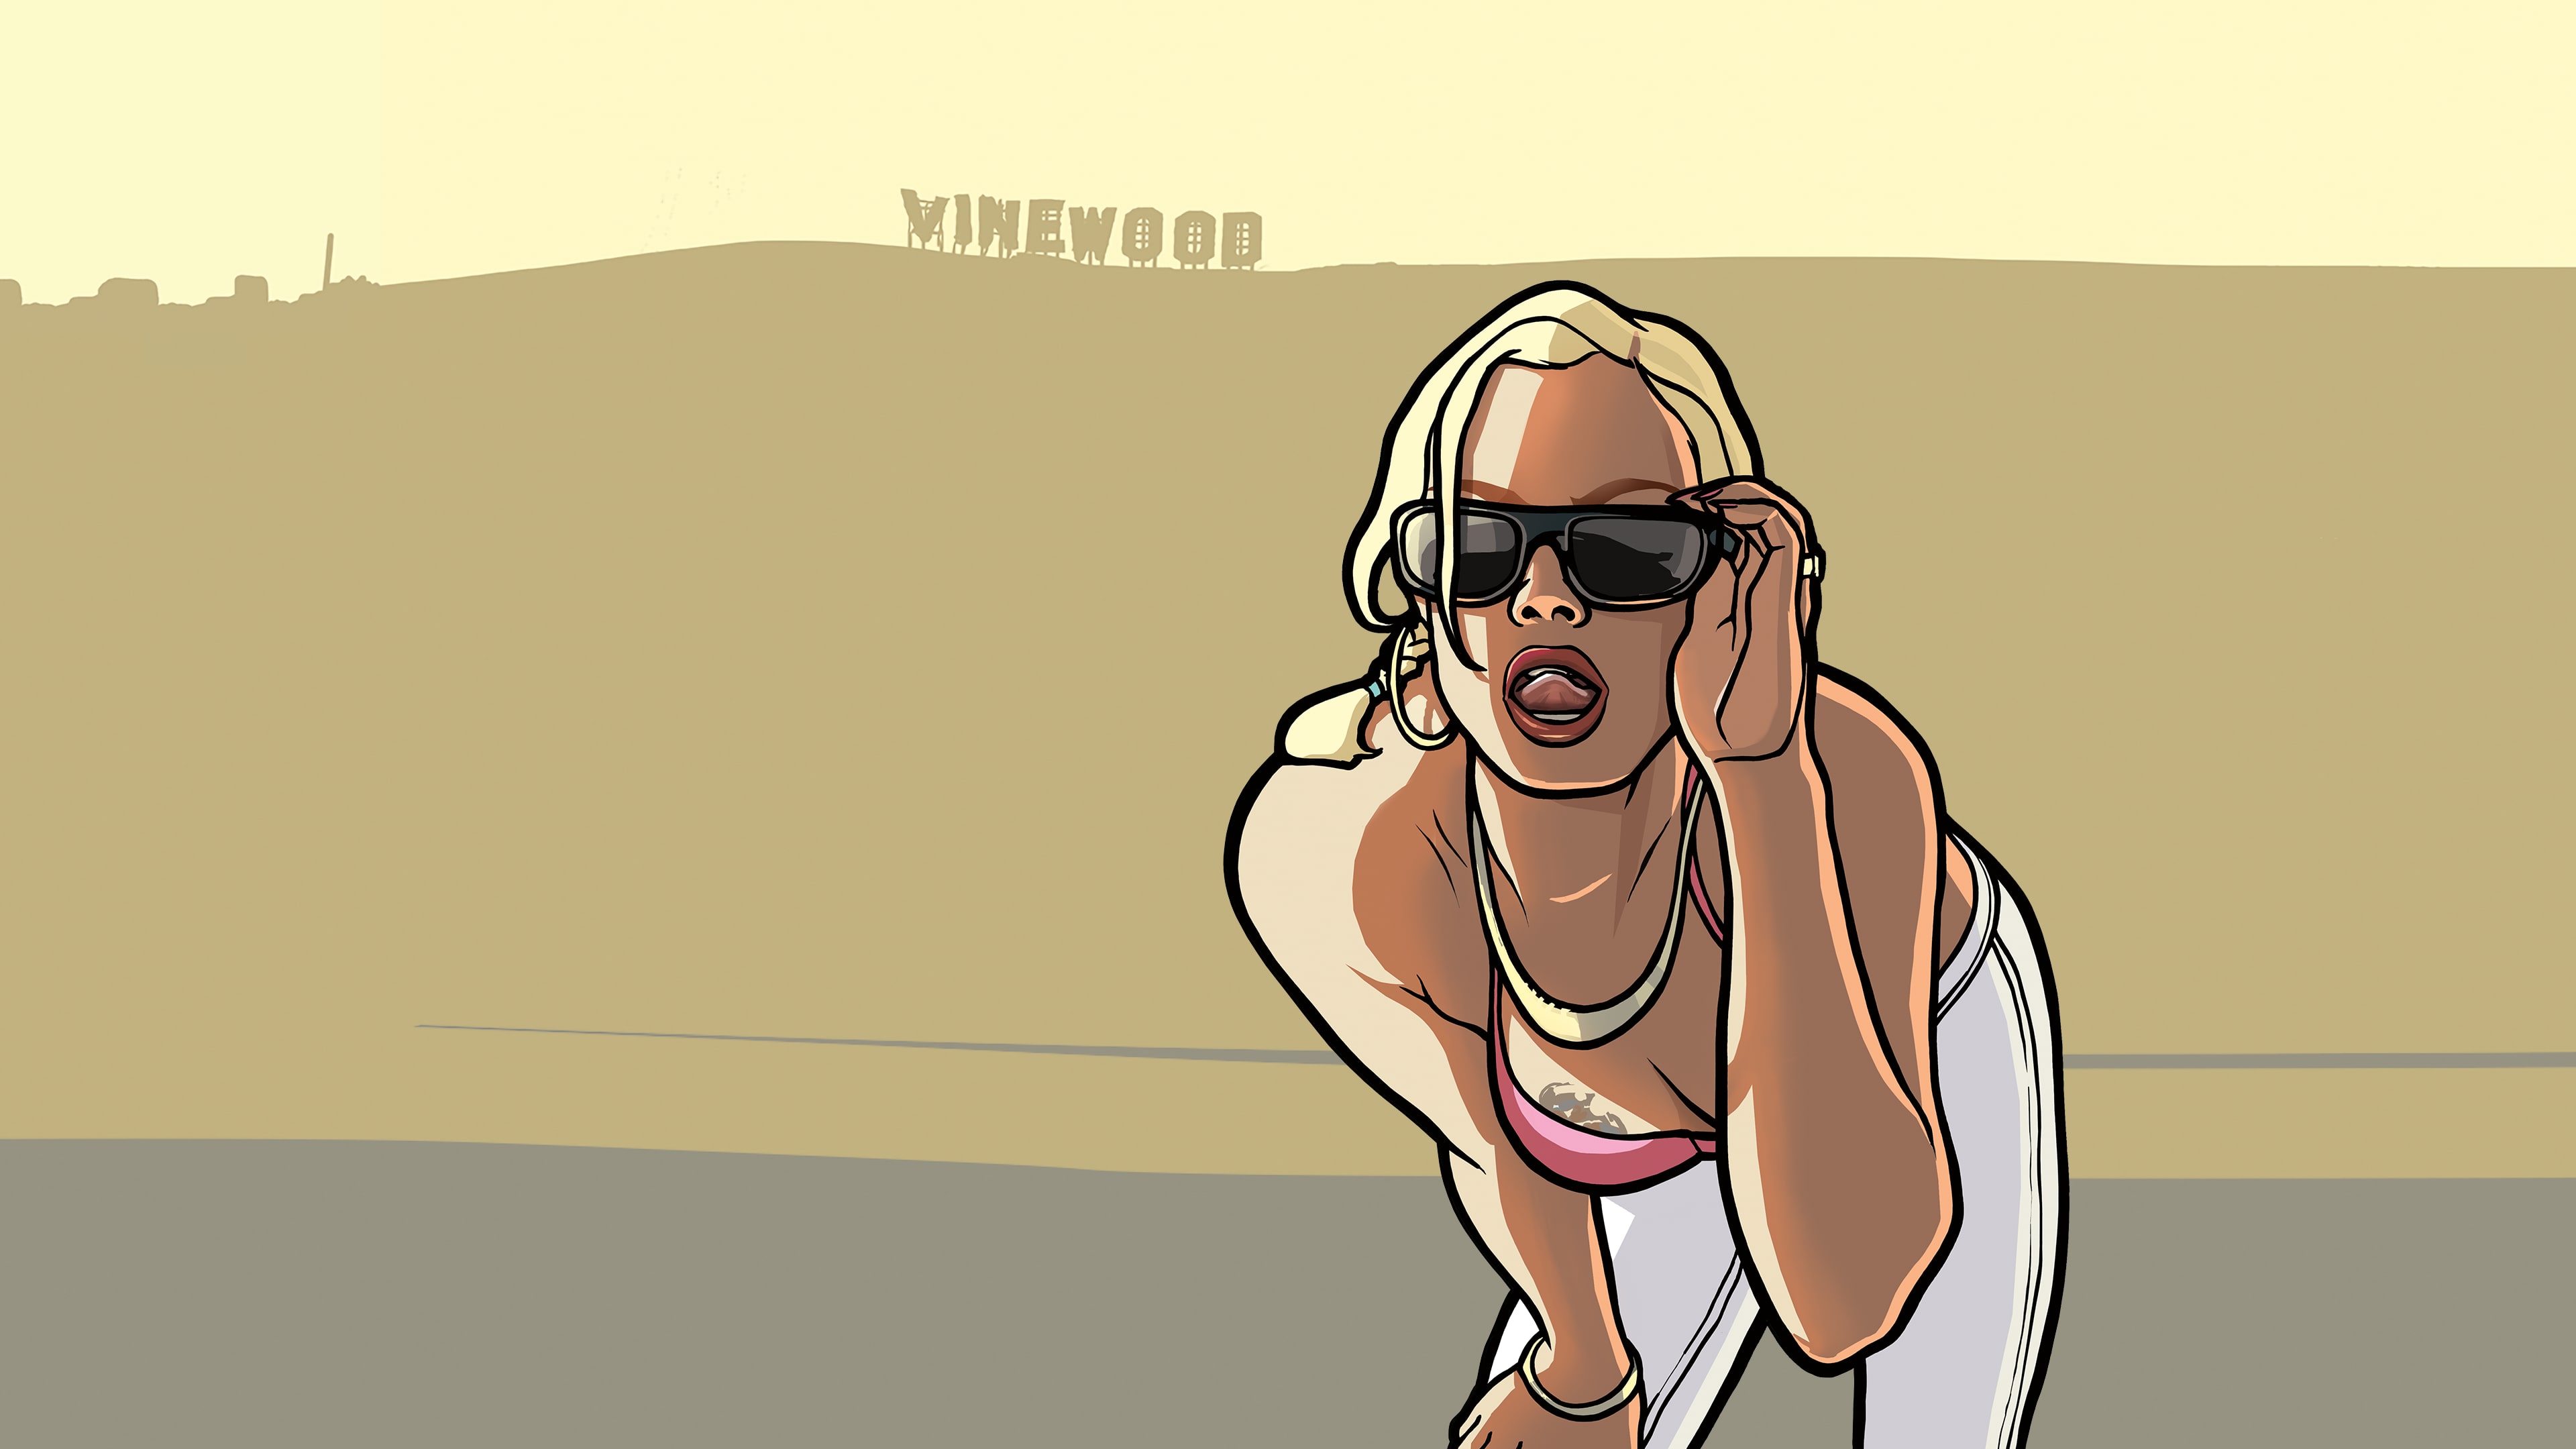 Grand Theft Auto: San Andreas now available in the App Store